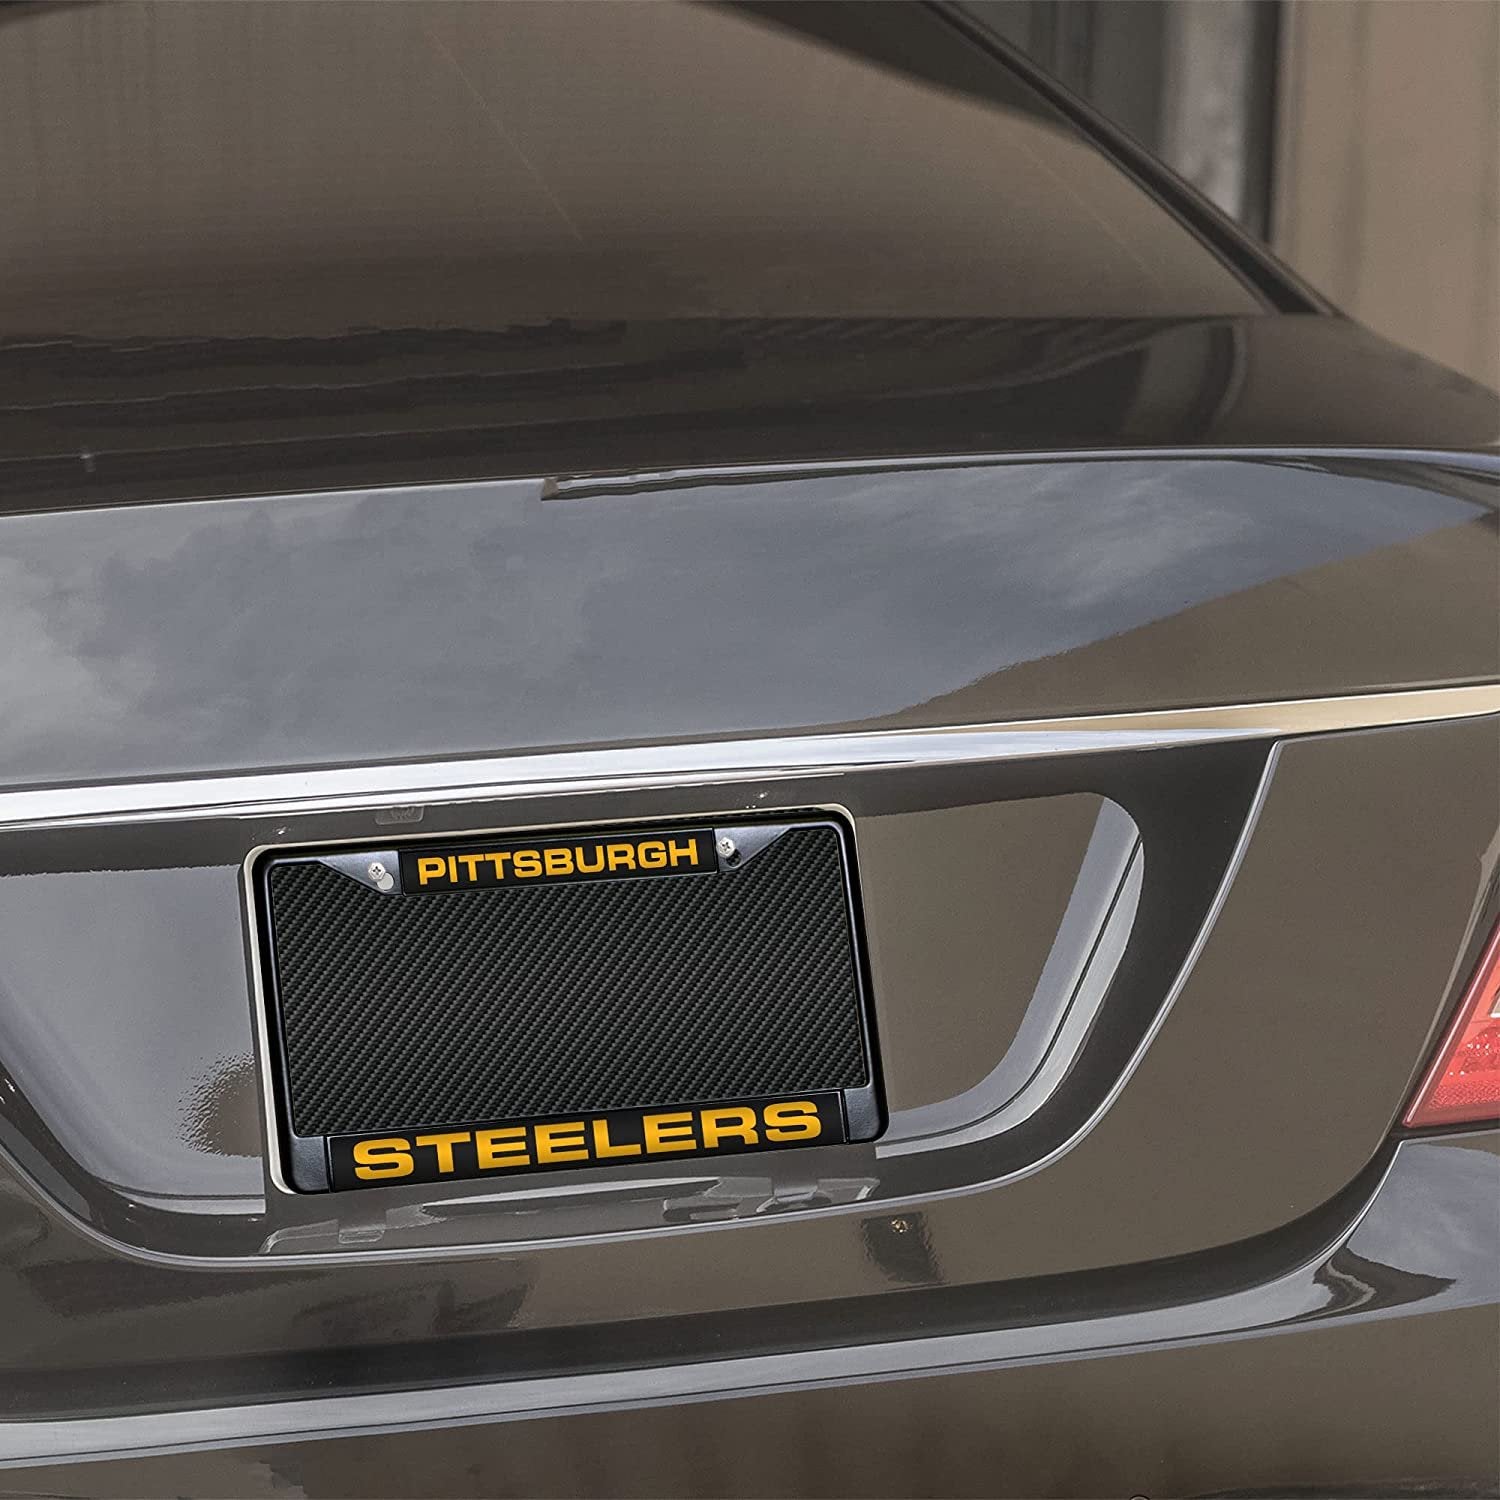 Pittsburgh Steelers Black Metal License Plate Frame Tag Cover, Laser Acrylic Mirrored Inserts, 12x6 Inch